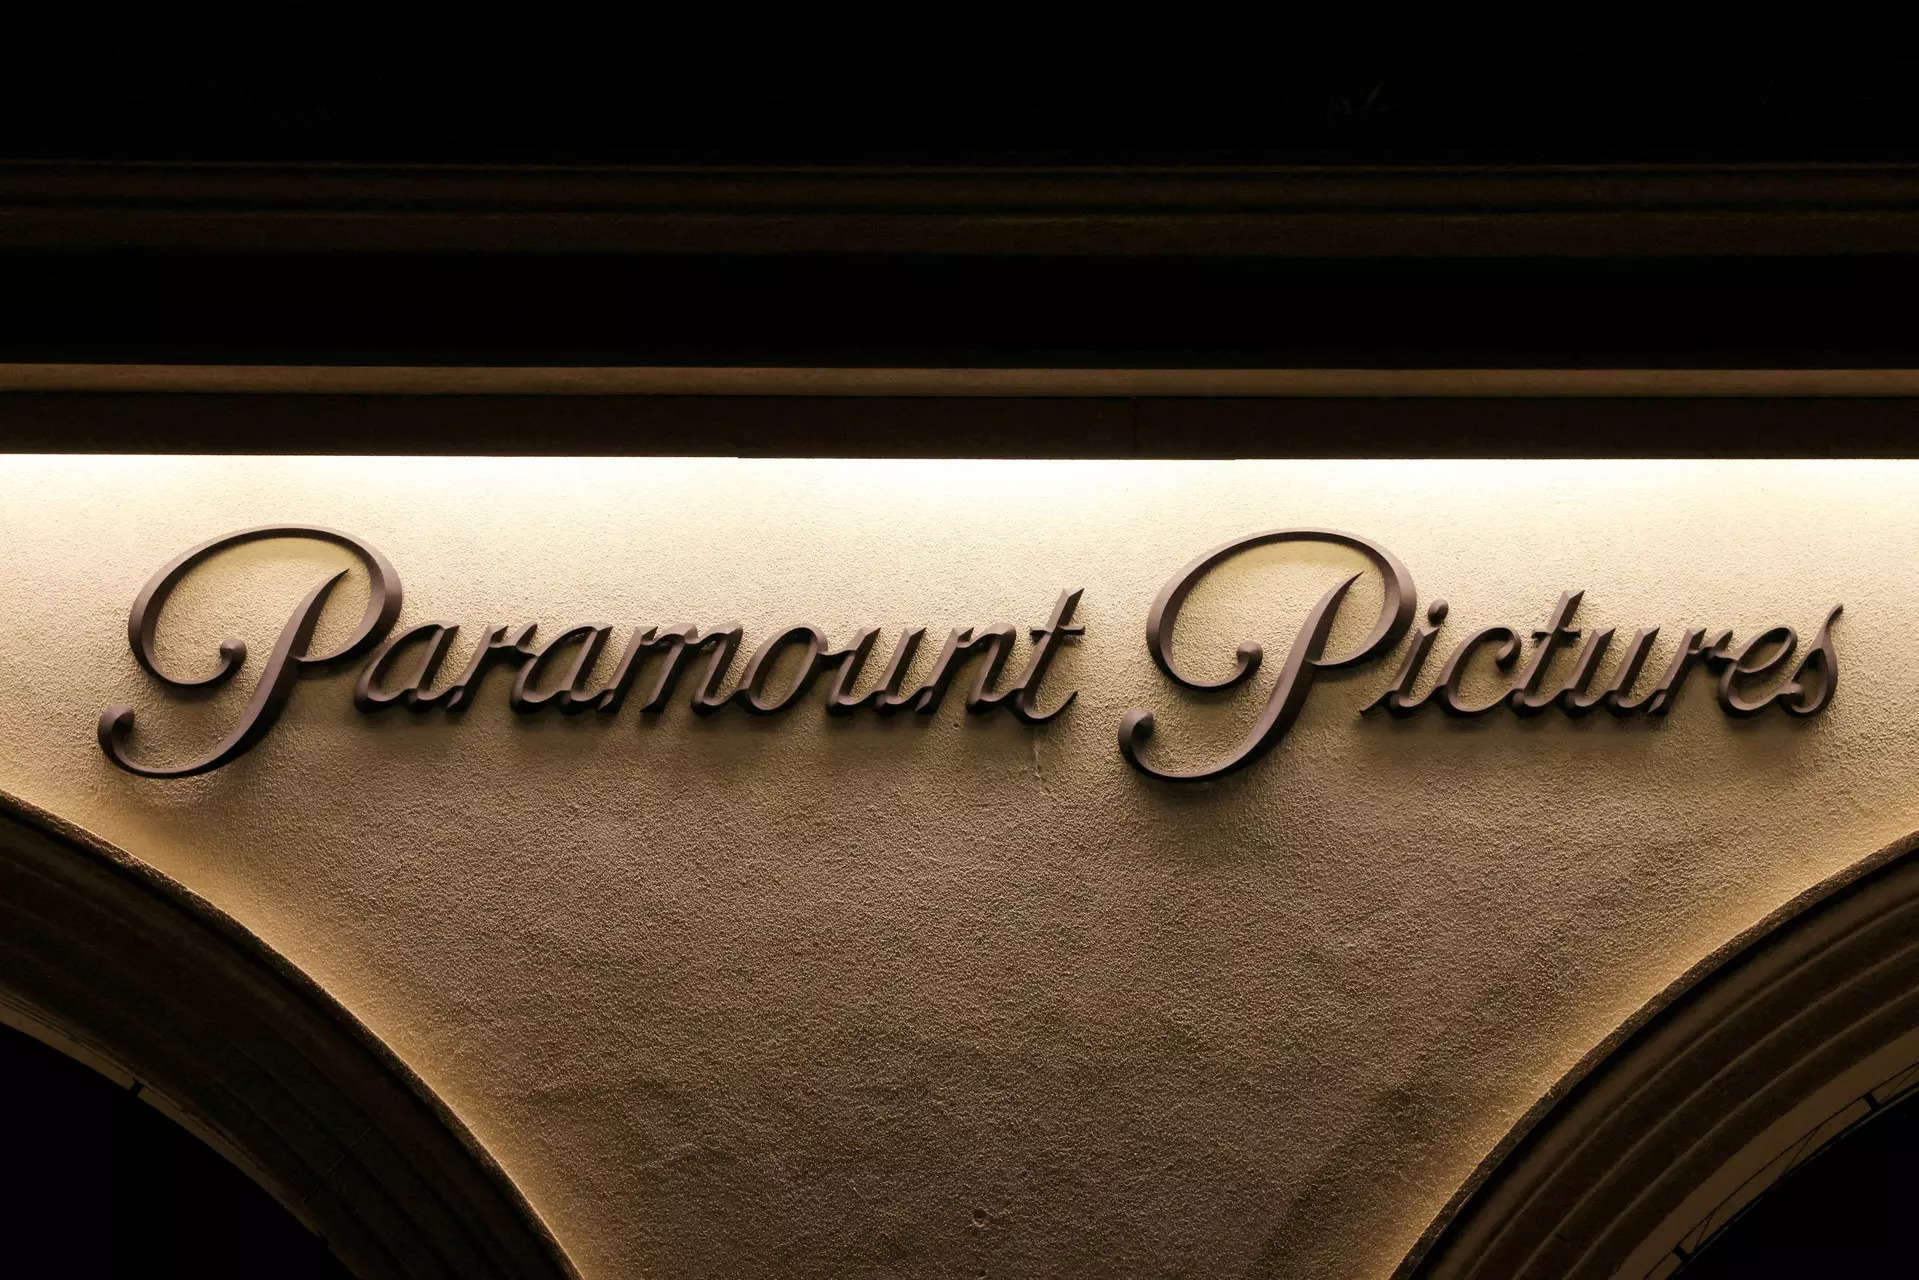 Sony and Apollo express interest in buying Paramount in $26 billion deal 